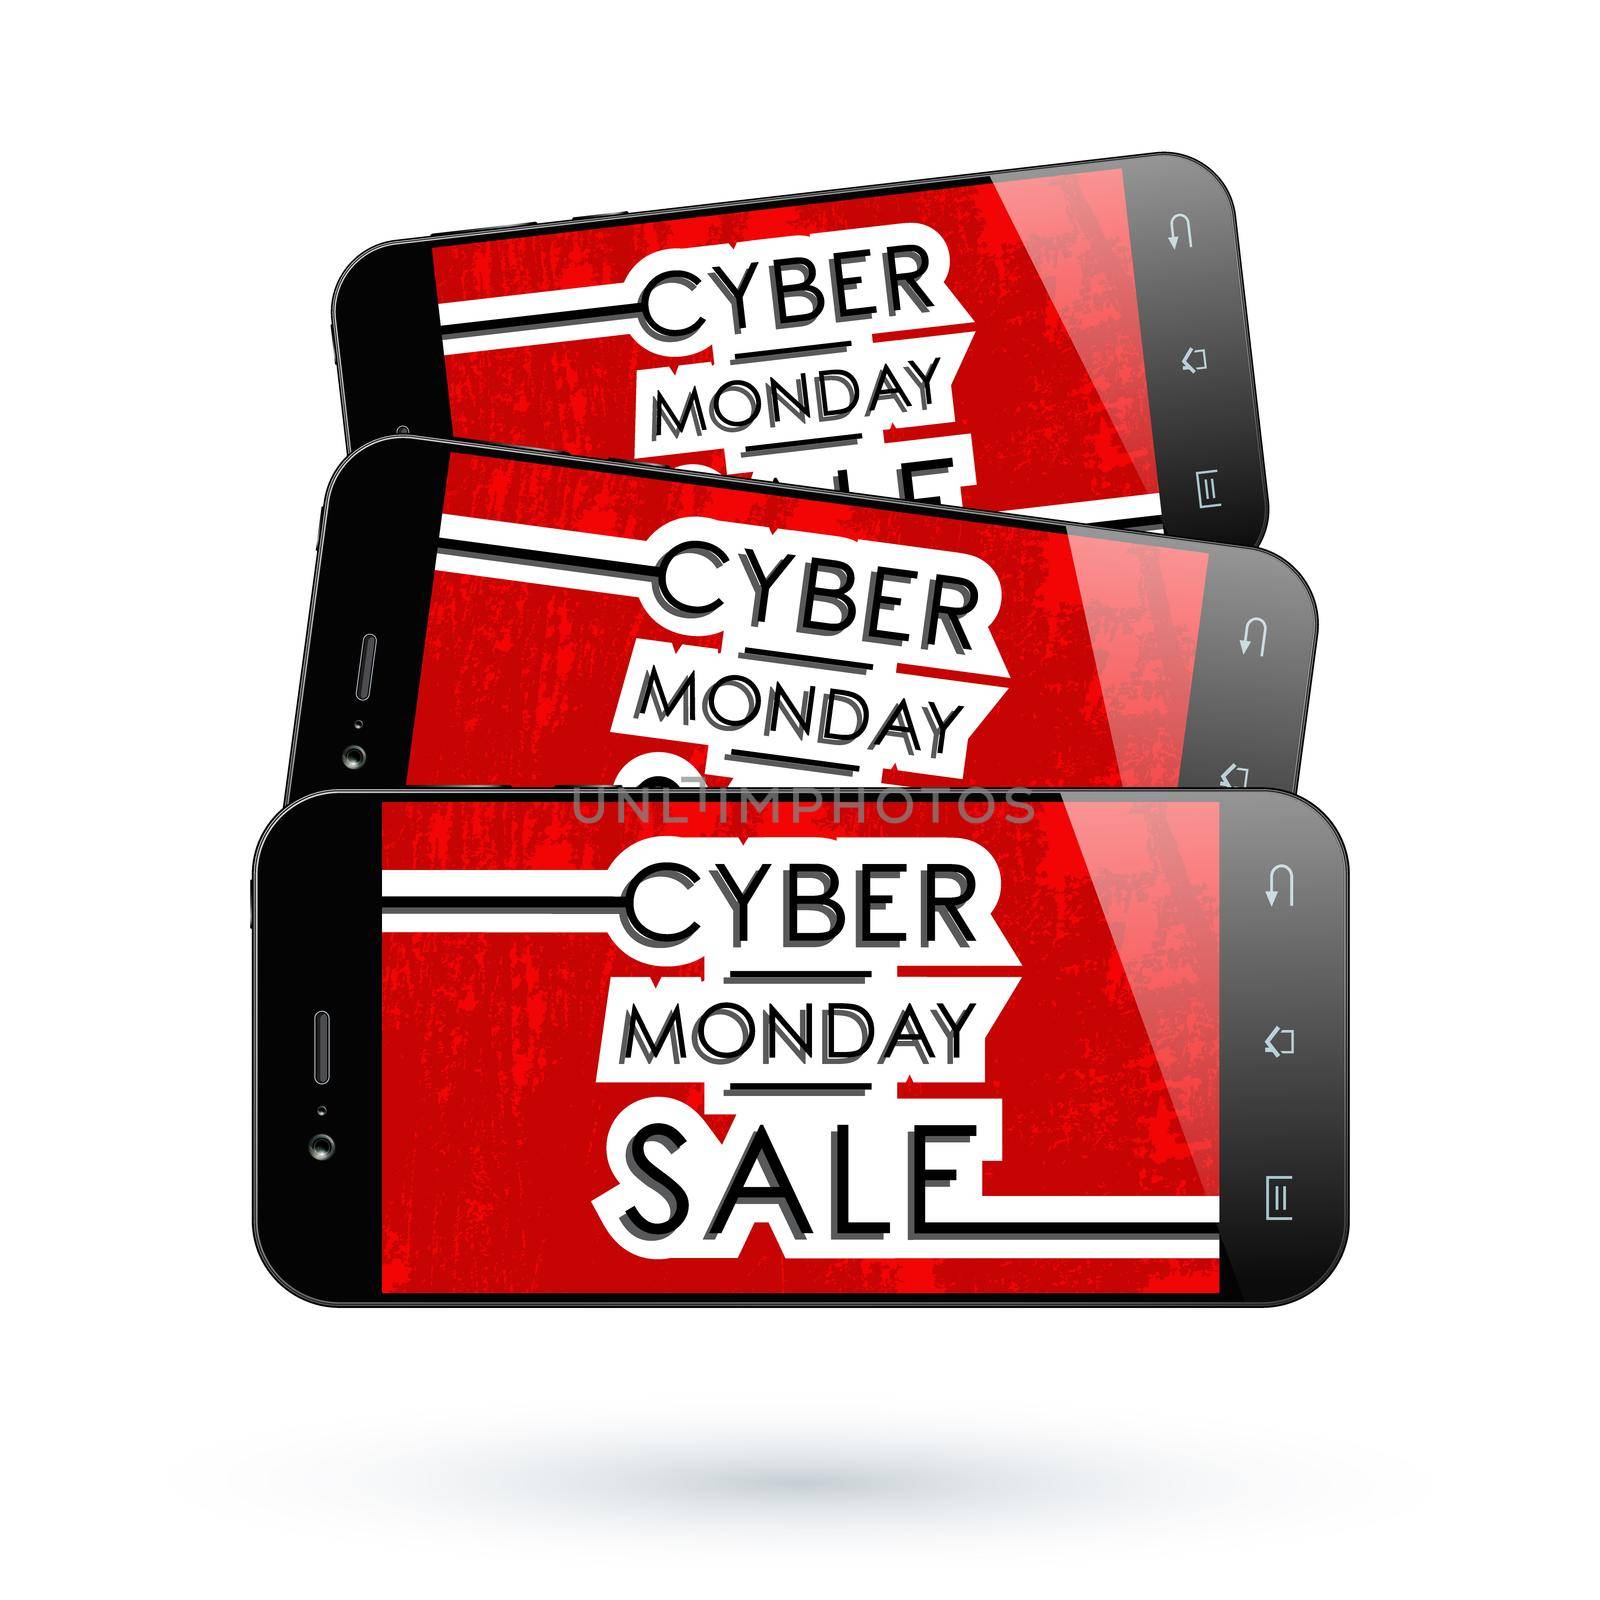 Cyber Monday Sale. Black Smart phone isolated. Vector illustration.